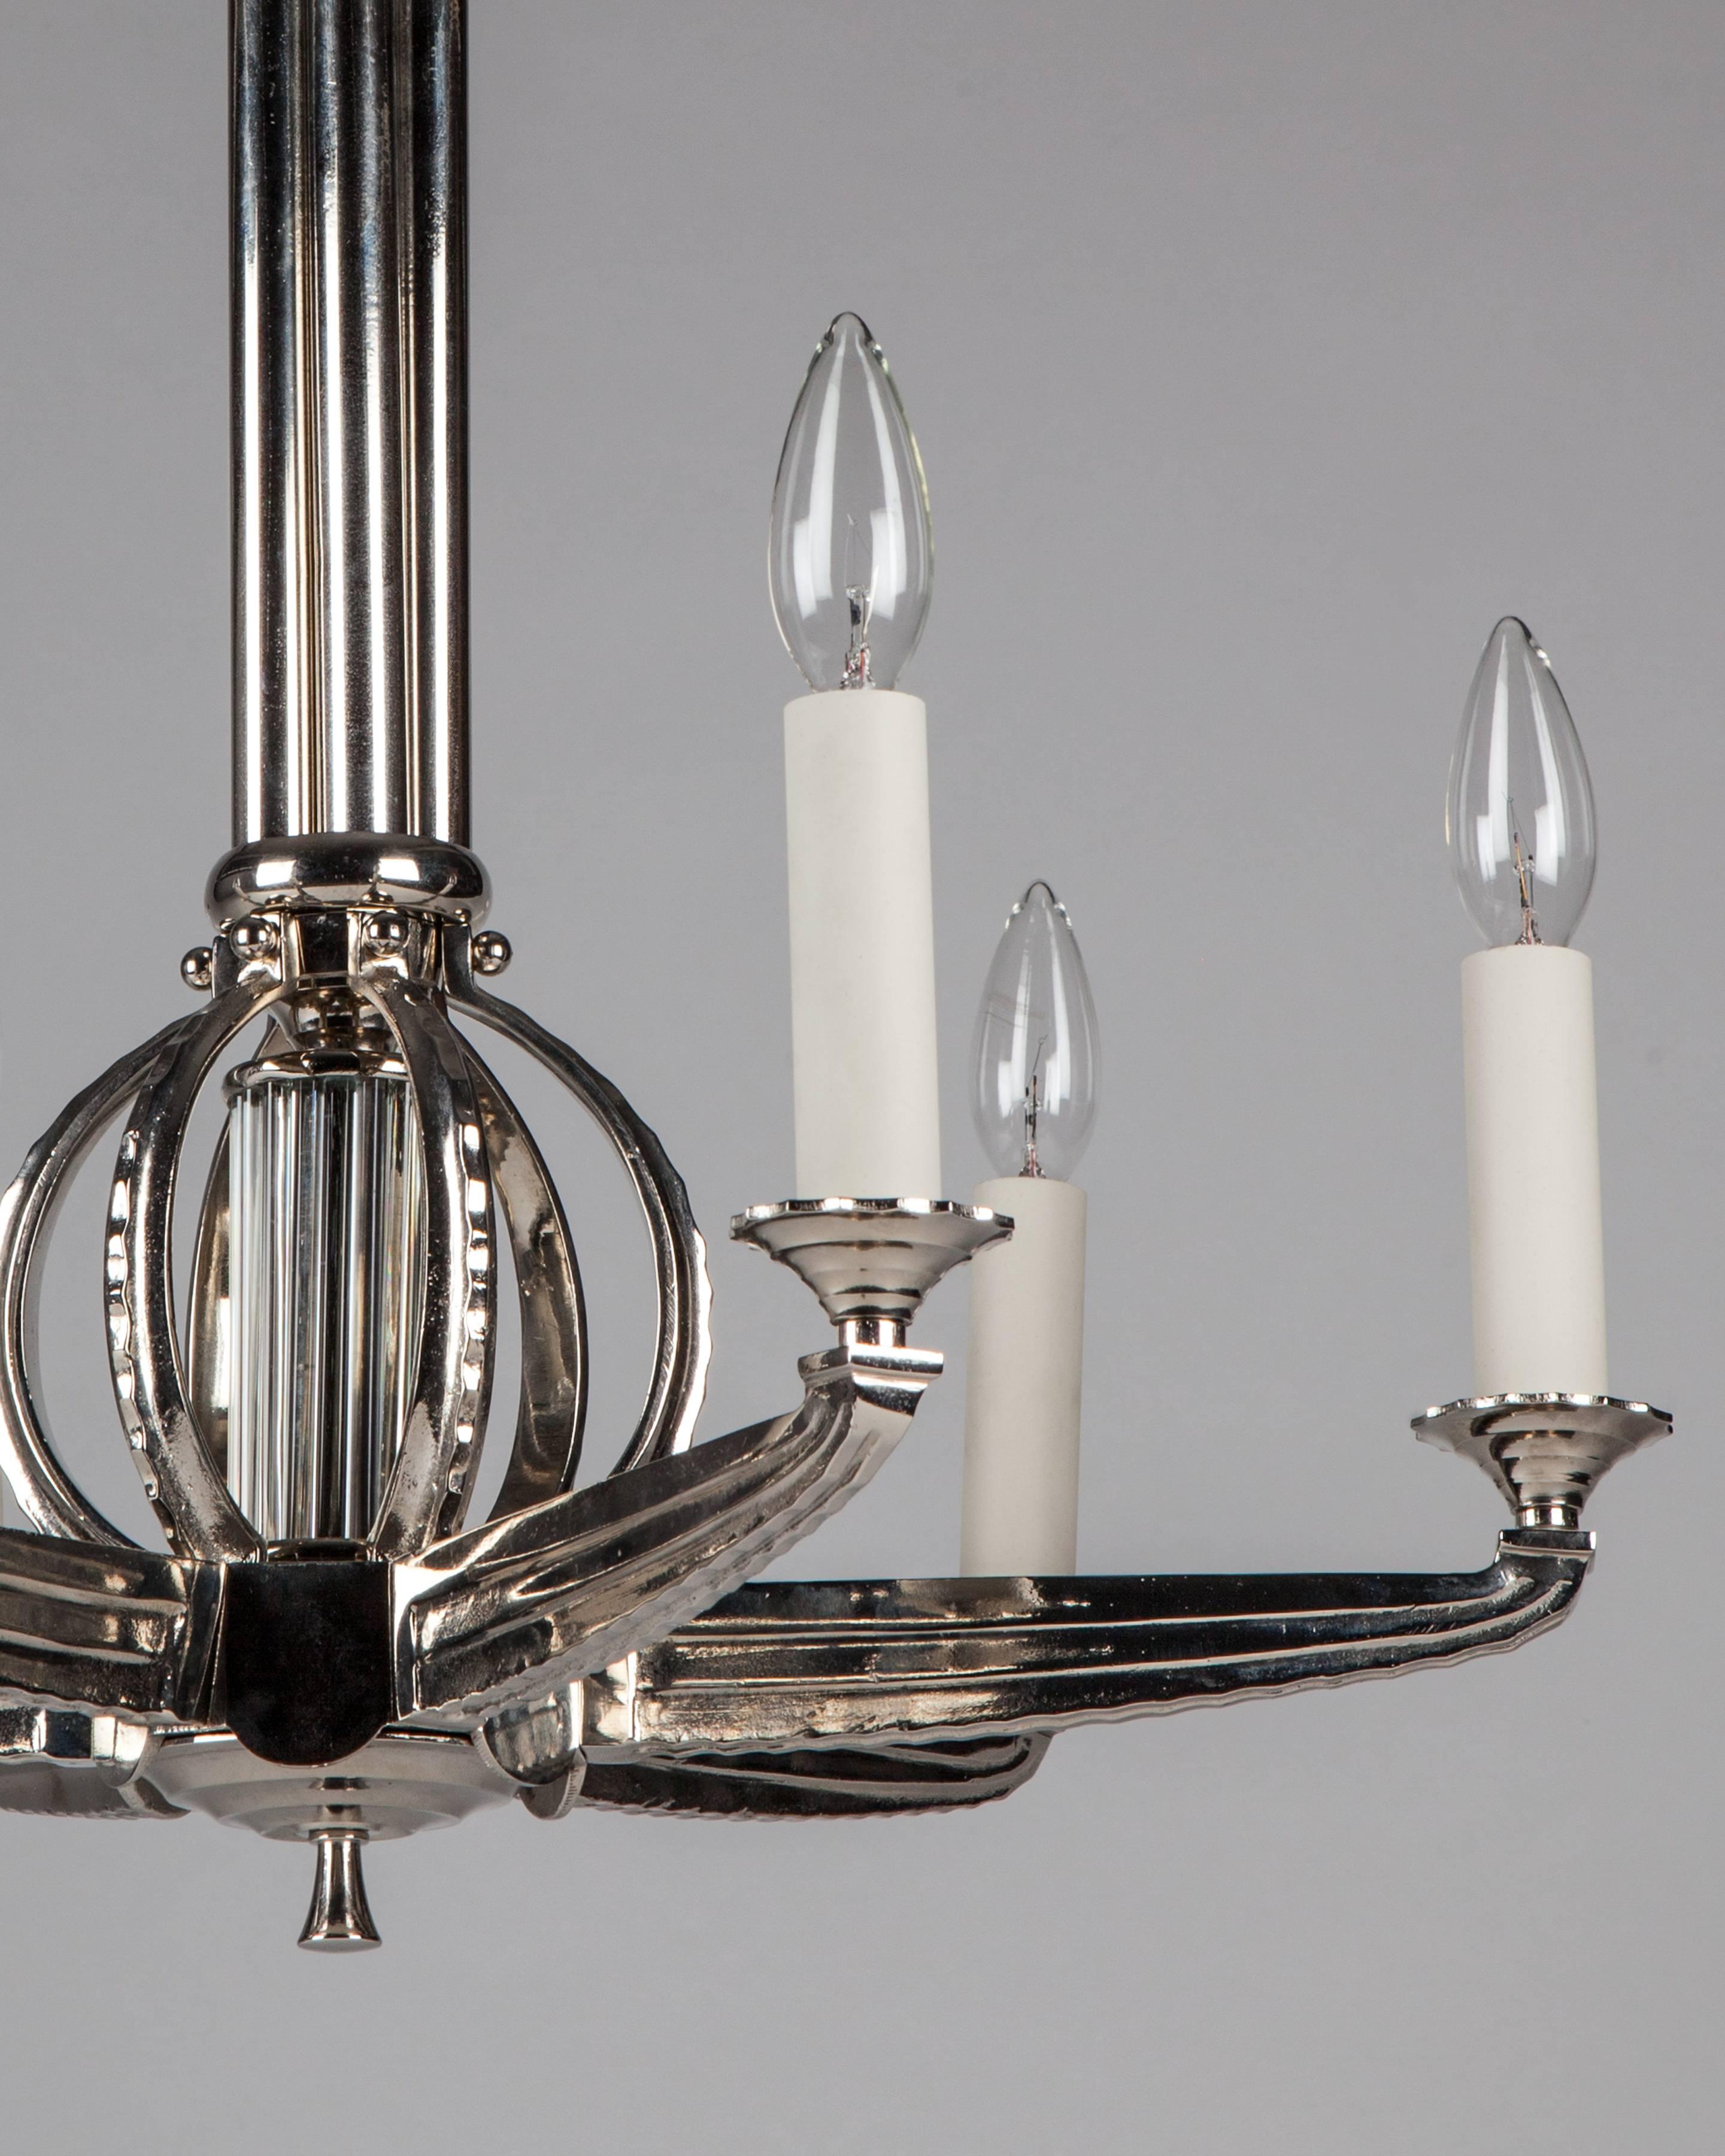 AHL4065
A vintage six-light German chandelier with a reeded nickel and glass rod body and fluted arms. In a polished nickel finish. Due to the antique nature of this fixture, there may be some nicks or imperfections in the